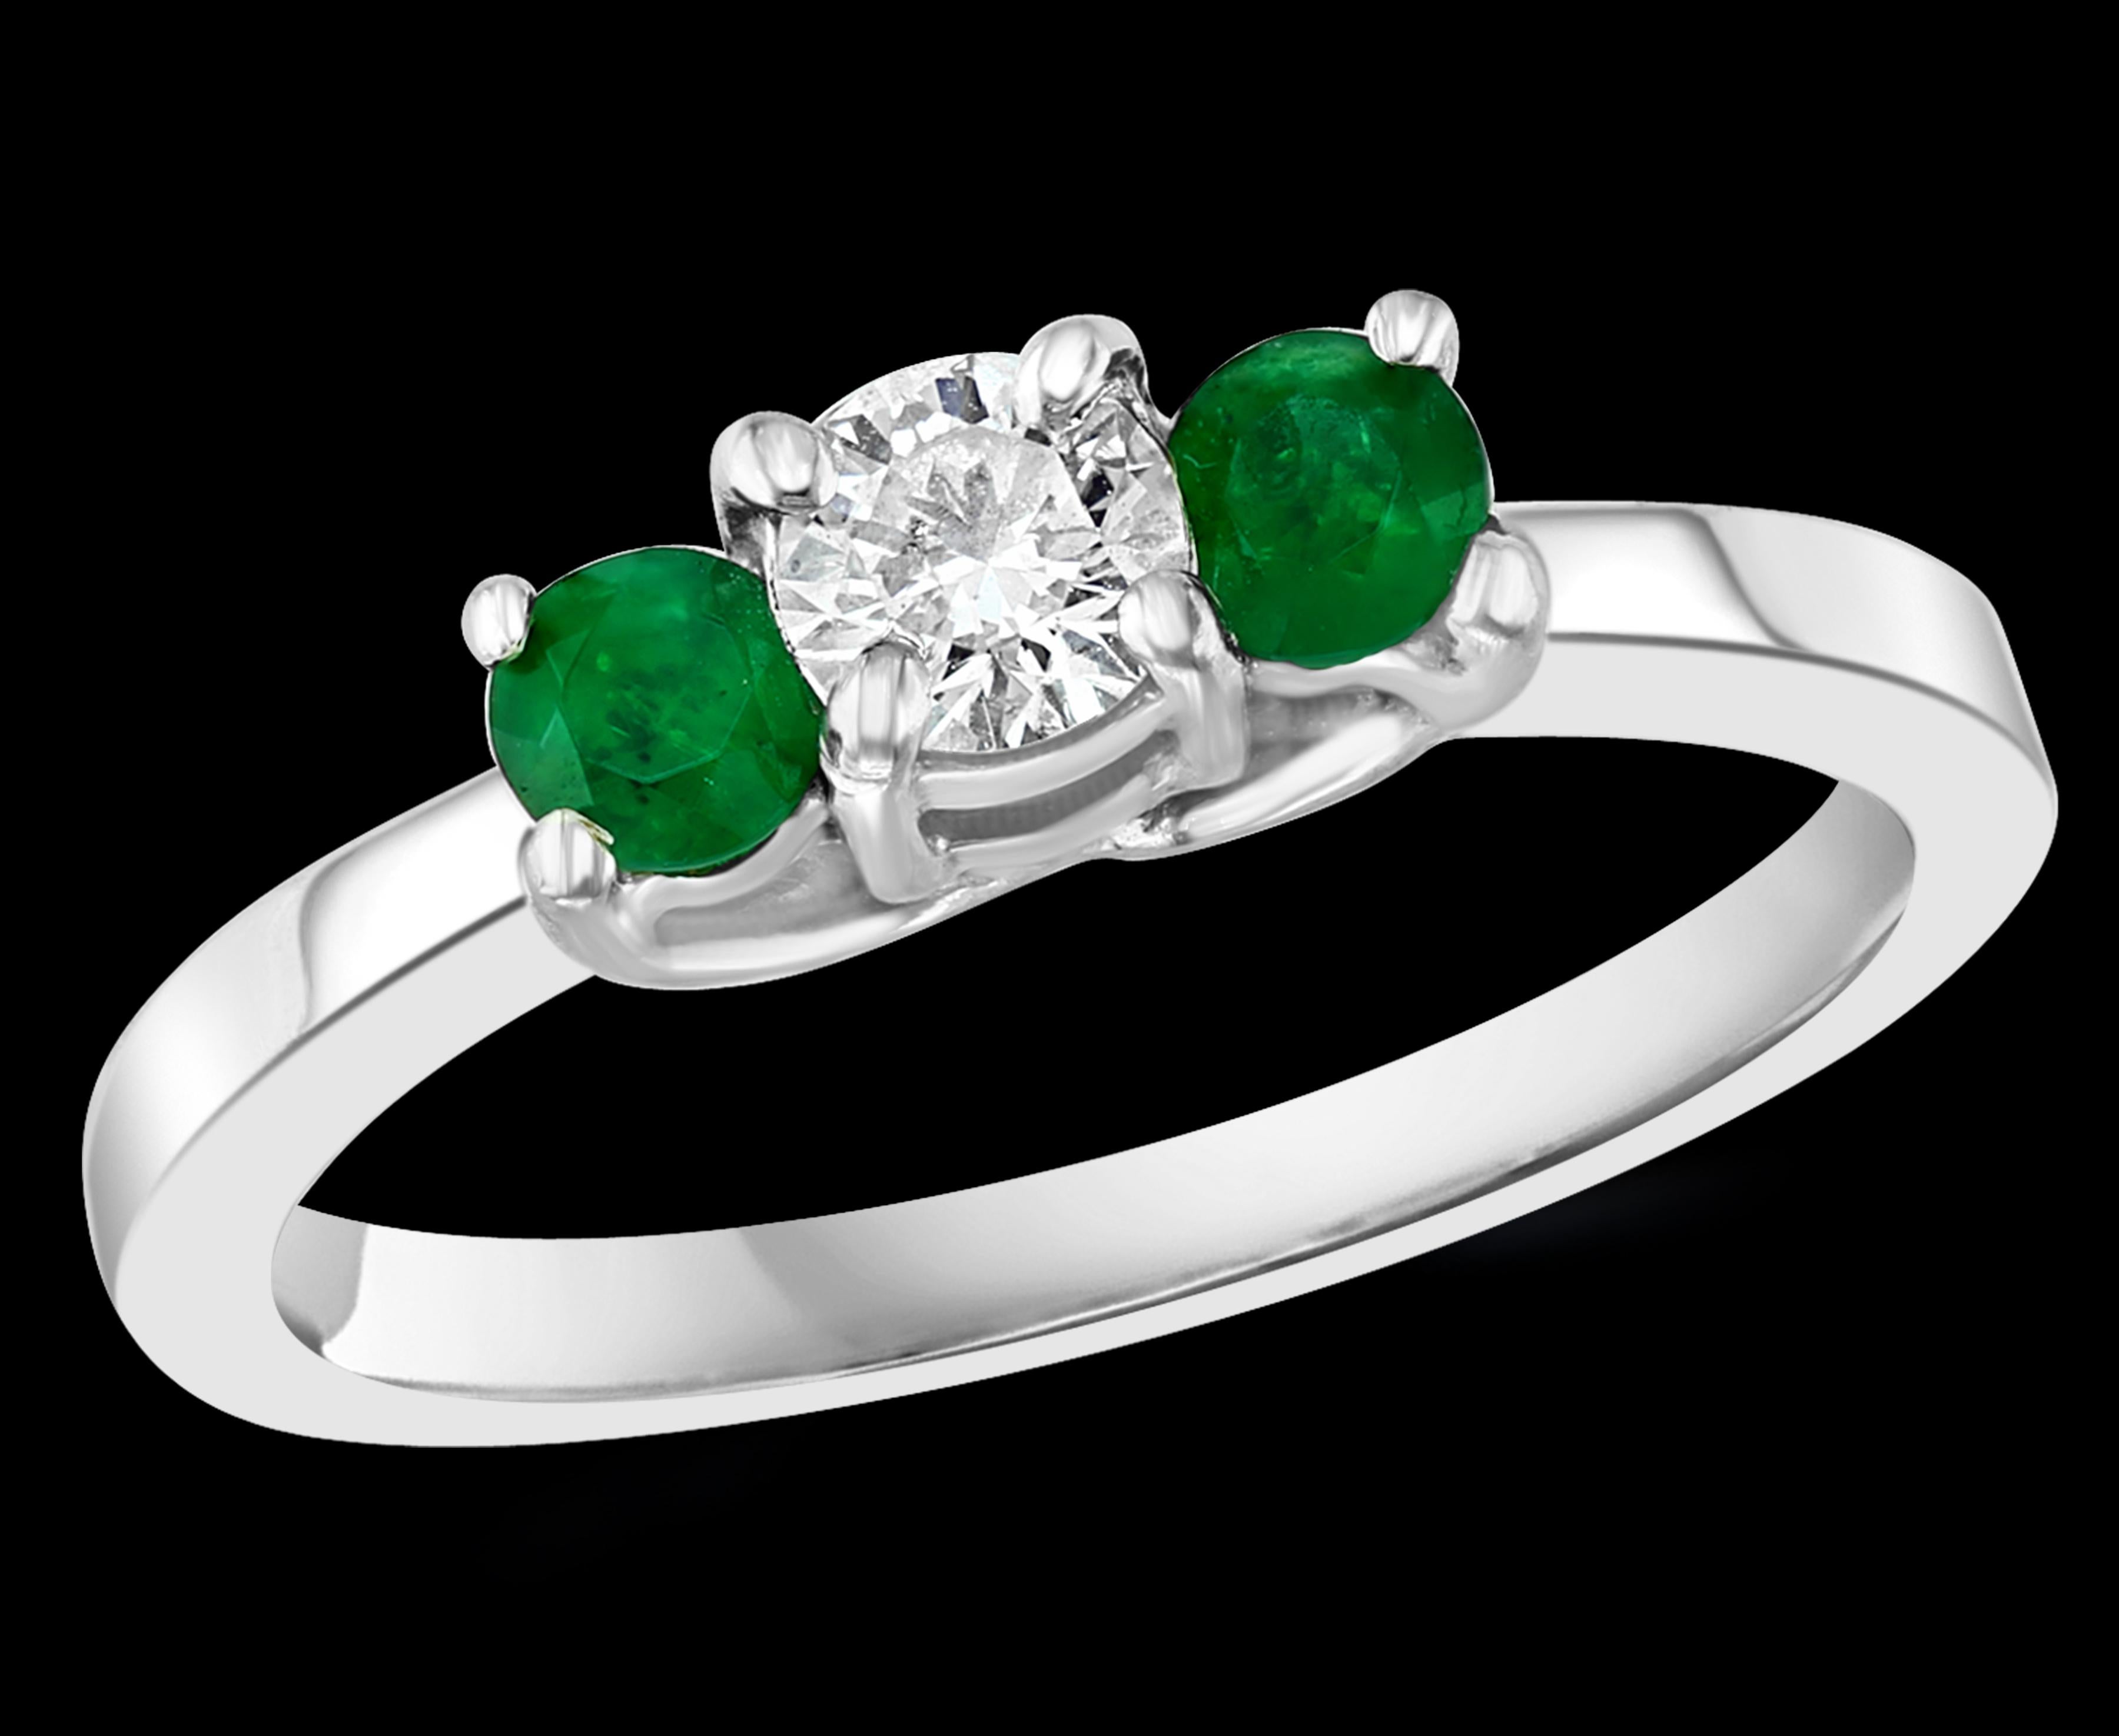 
Emerald And Diamond Three Stone Ring 14 Karat White Gold Size 6.5
Round Shape  Emerald Ring 
 Very clean and intense green color . 10 pointer each emerald . There is a 20 pointer diamond in the center
Total diamonds 0.20 Ct
Very high quality ring
